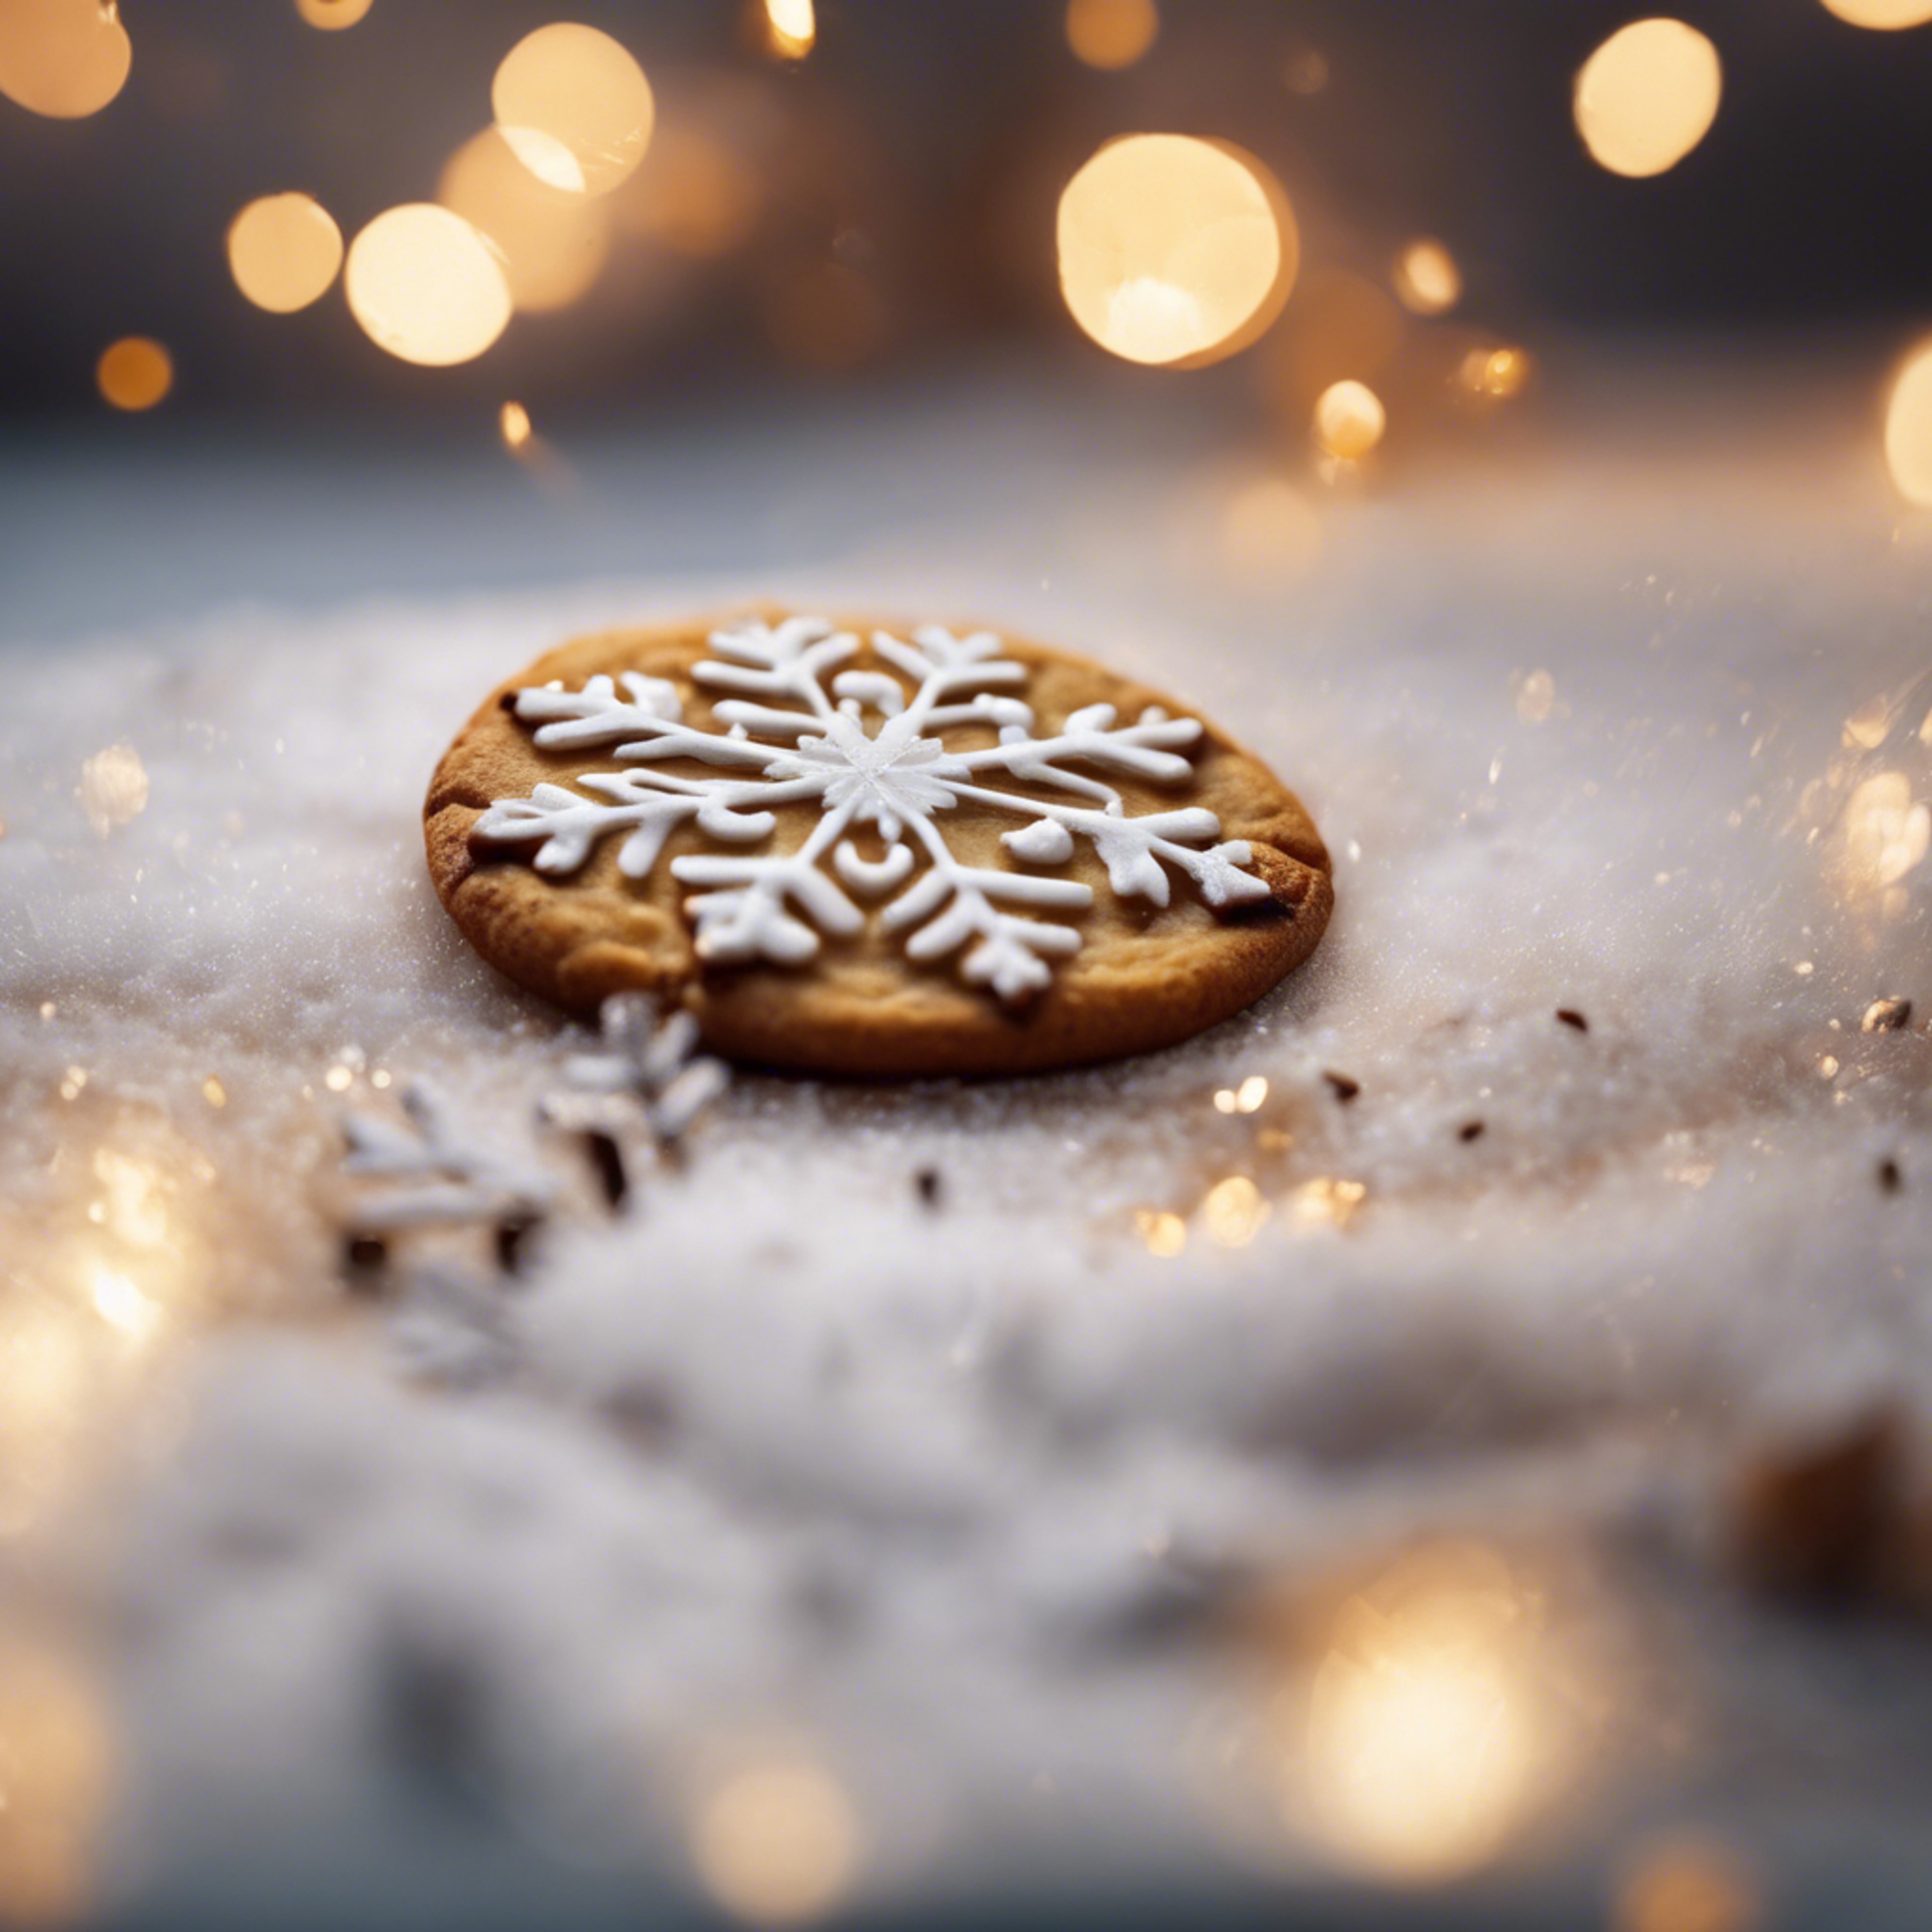 A freshly baked warm cookie with a snowflake landing on it. کاغذ دیواری[89e6bcadefb047bd9a34]